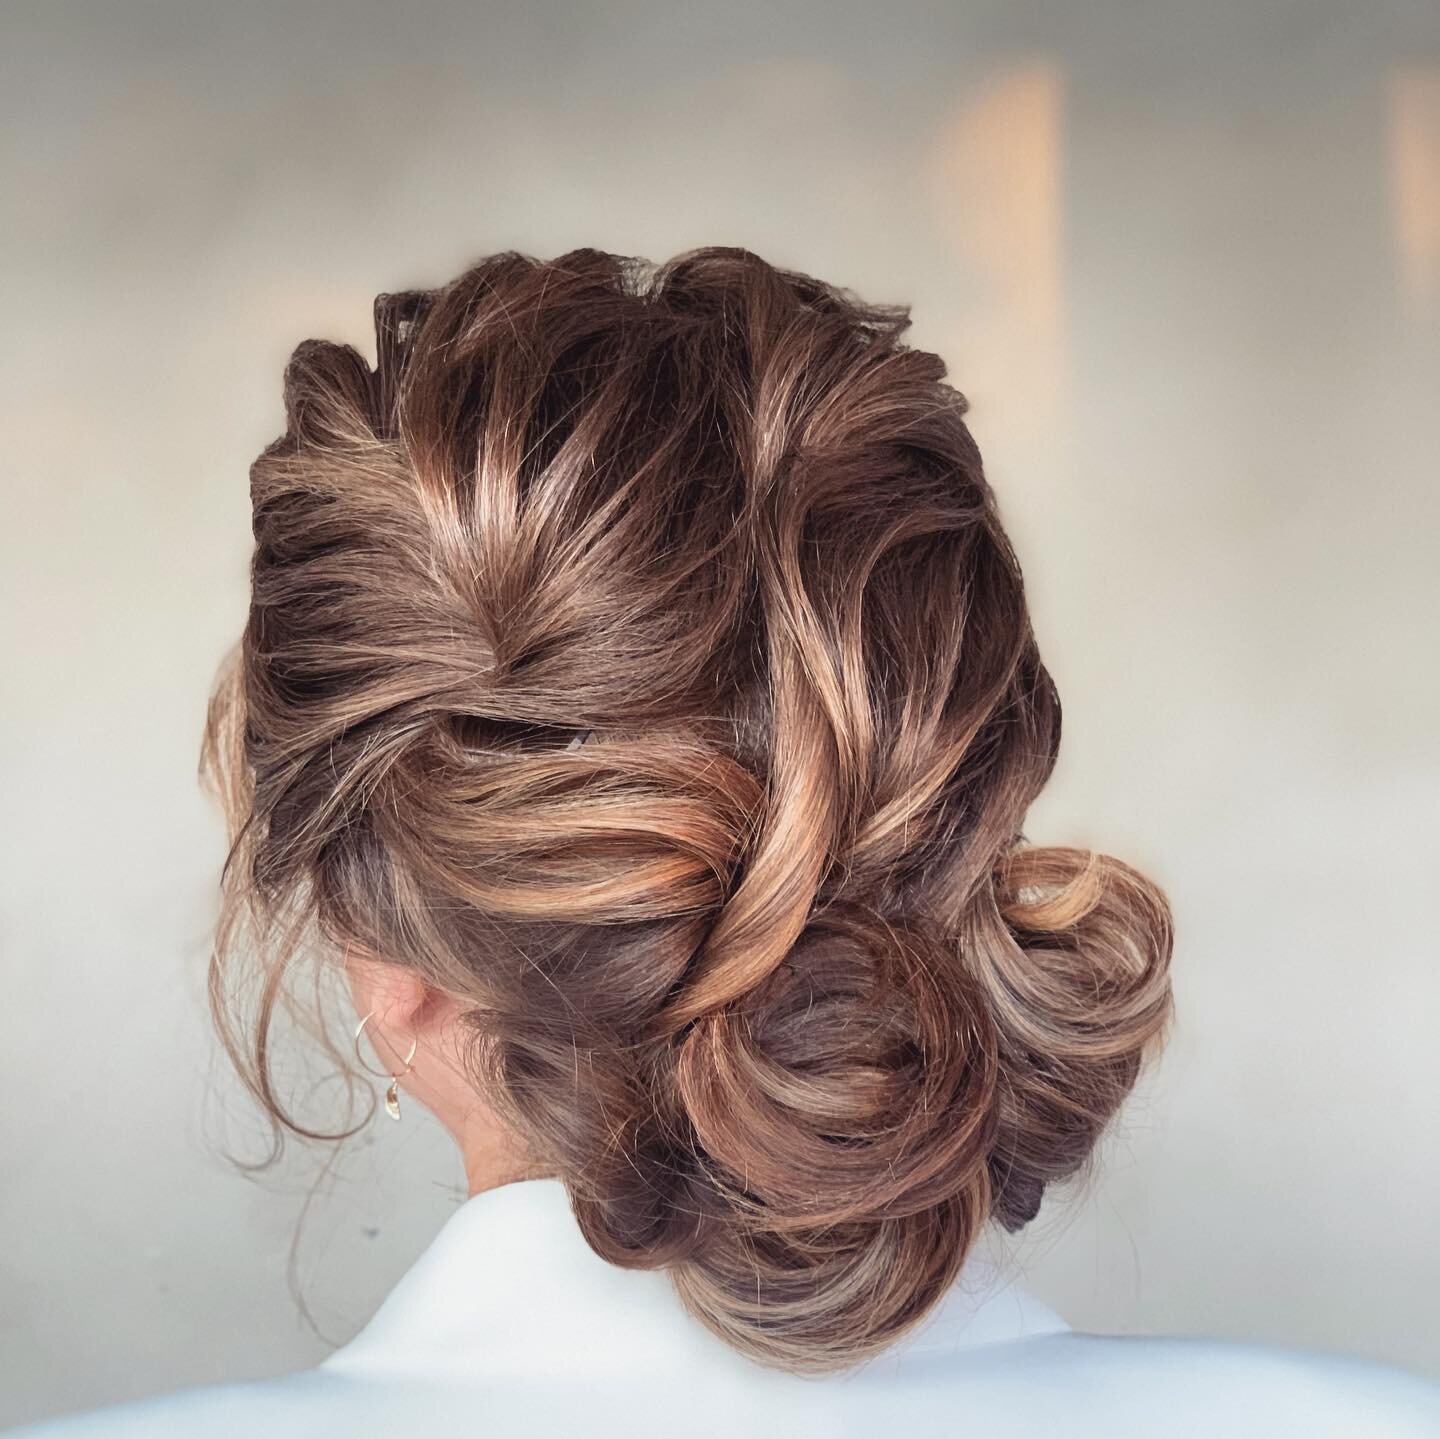 Another beautiful hairstyle I had the pleasure of creating 😍 Are you still looking for a bridal hair and makeup artist for 2020 or 2021? Send me a message for more information ✨
&bull;
&bull;
&bull;
&bull;
&bull;
&bull;
&bull;#winchester #winchester